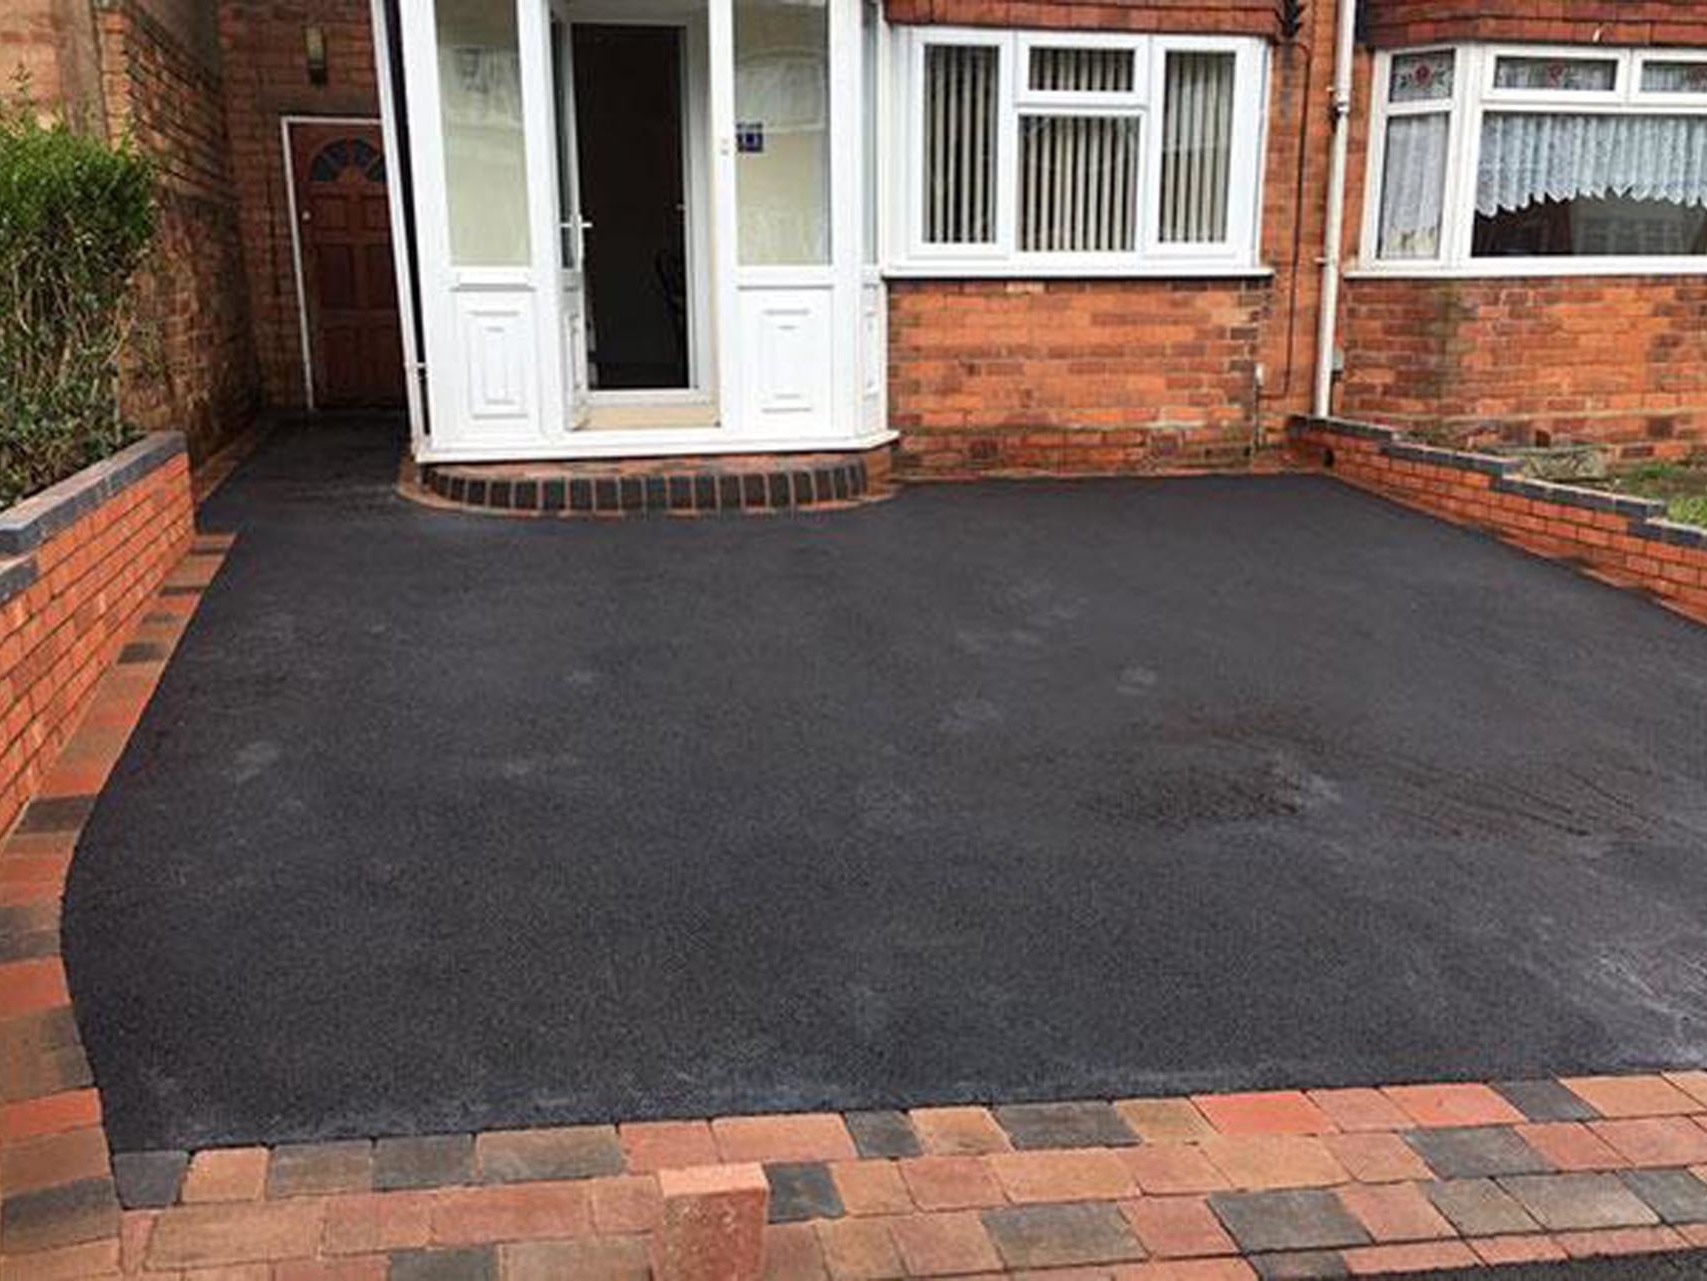 Cambs Paving - Tarmac specialists in Cambridge